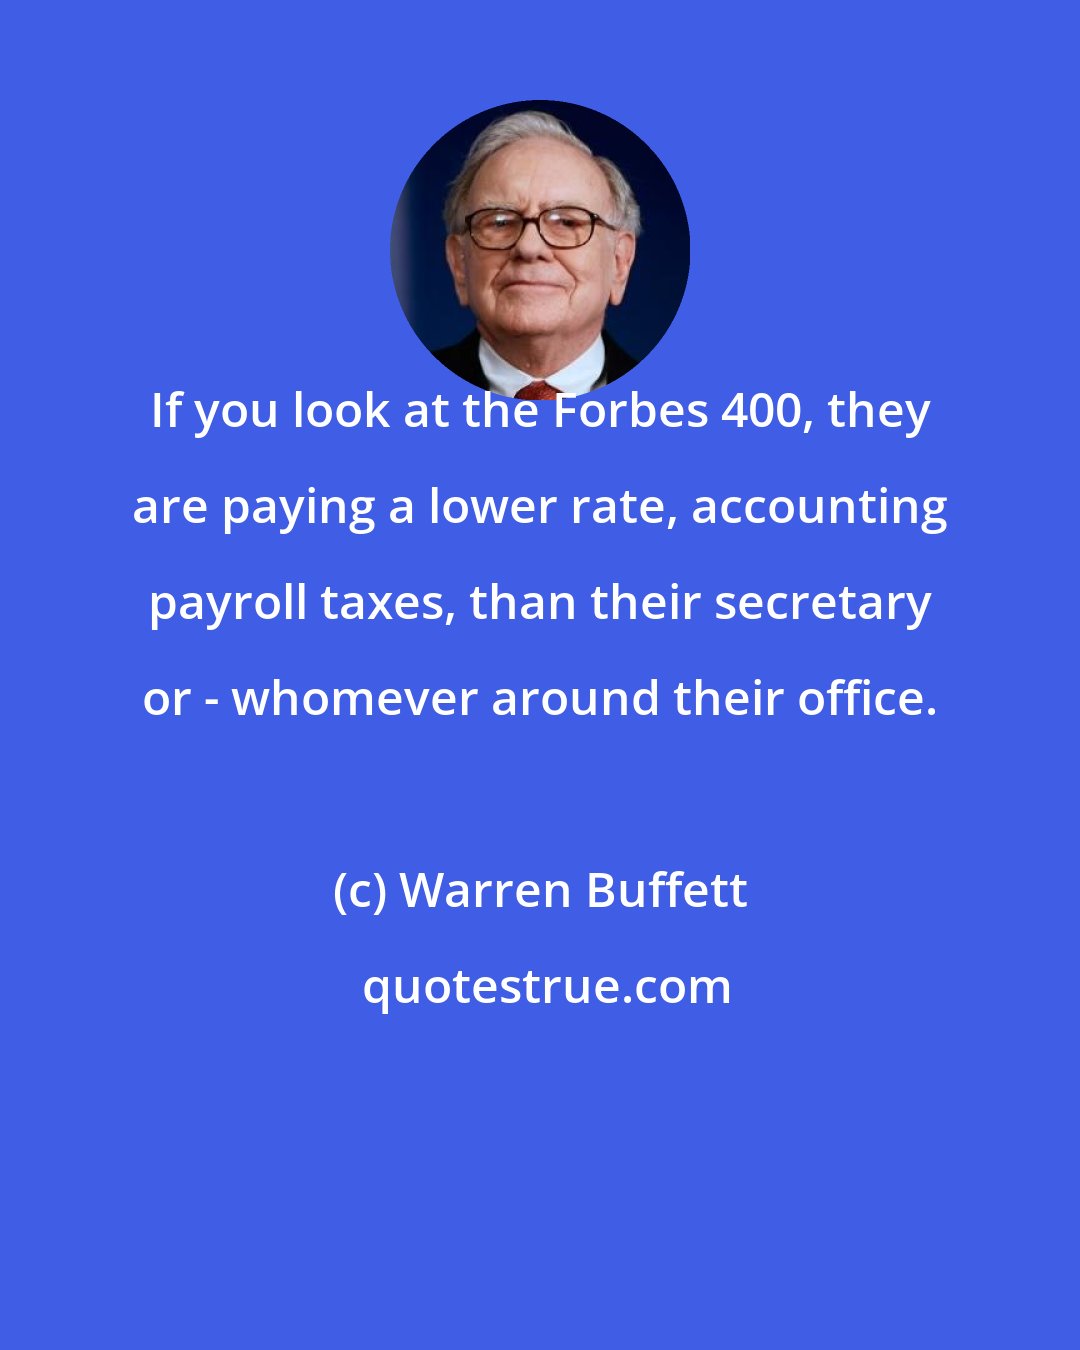 Warren Buffett: If you look at the Forbes 400, they are paying a lower rate, accounting payroll taxes, than their secretary or - whomever around their office.